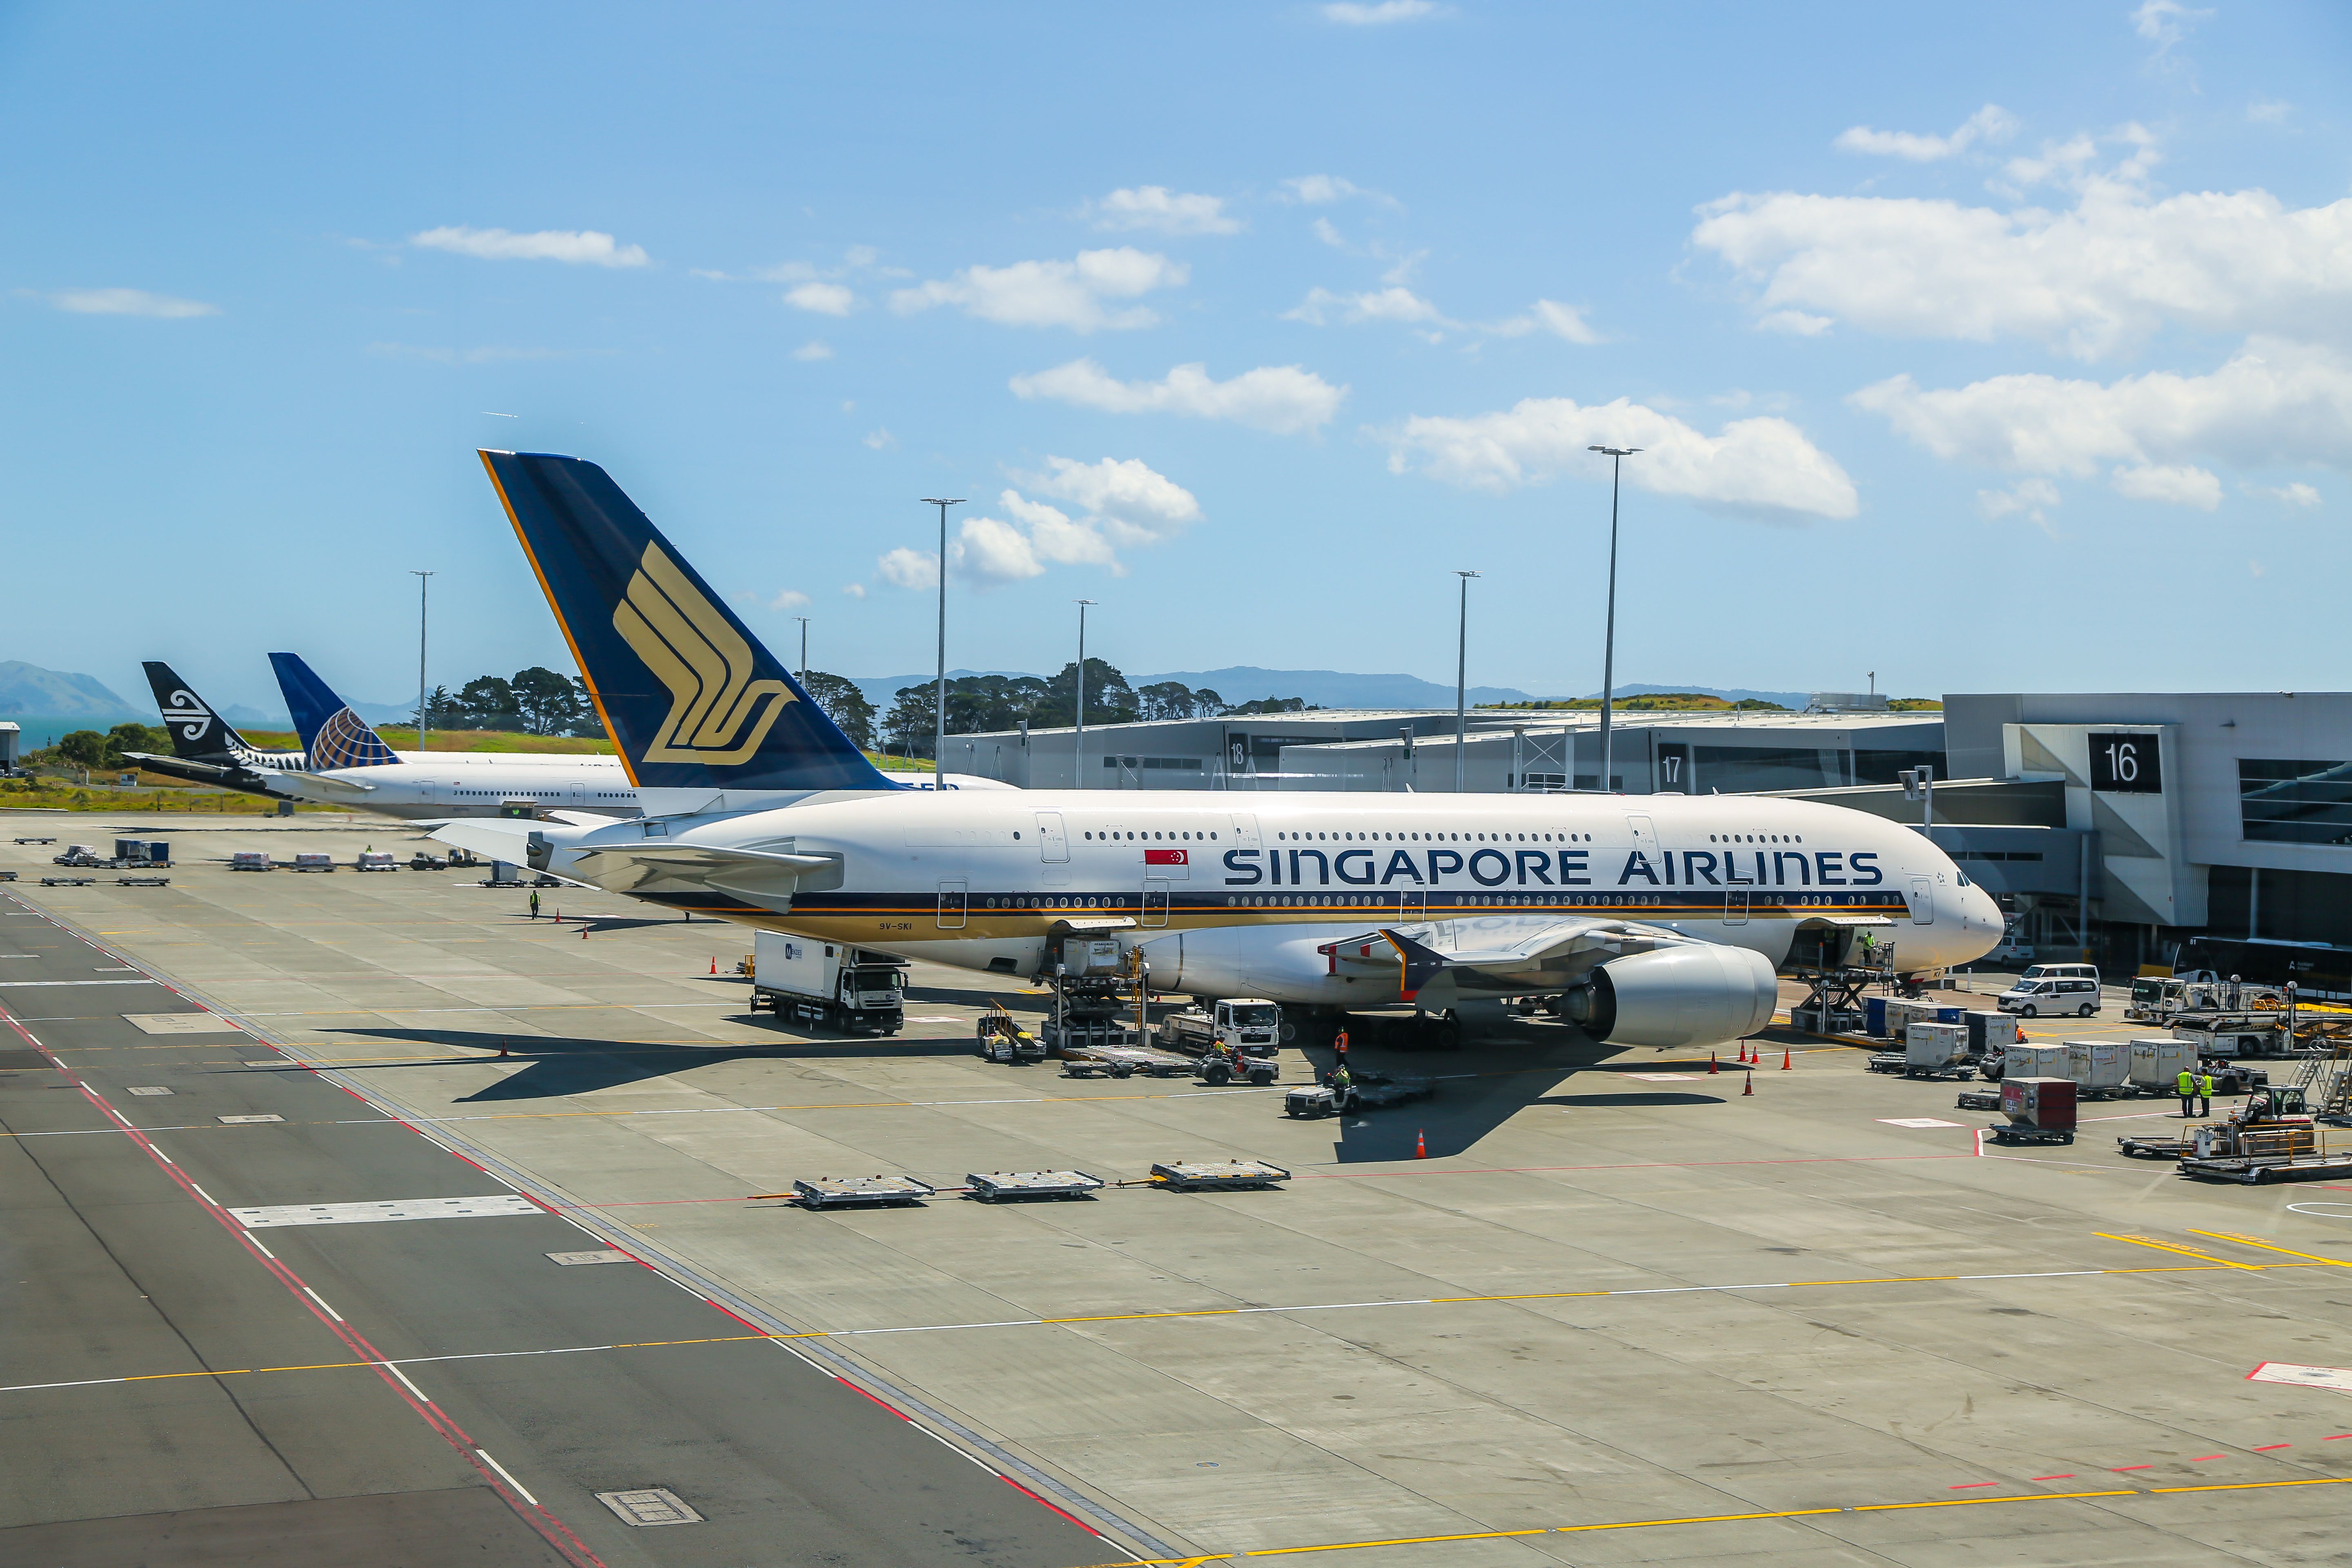 Singapore Airlines Airbus A380 at gate 16 at Auckland Airport